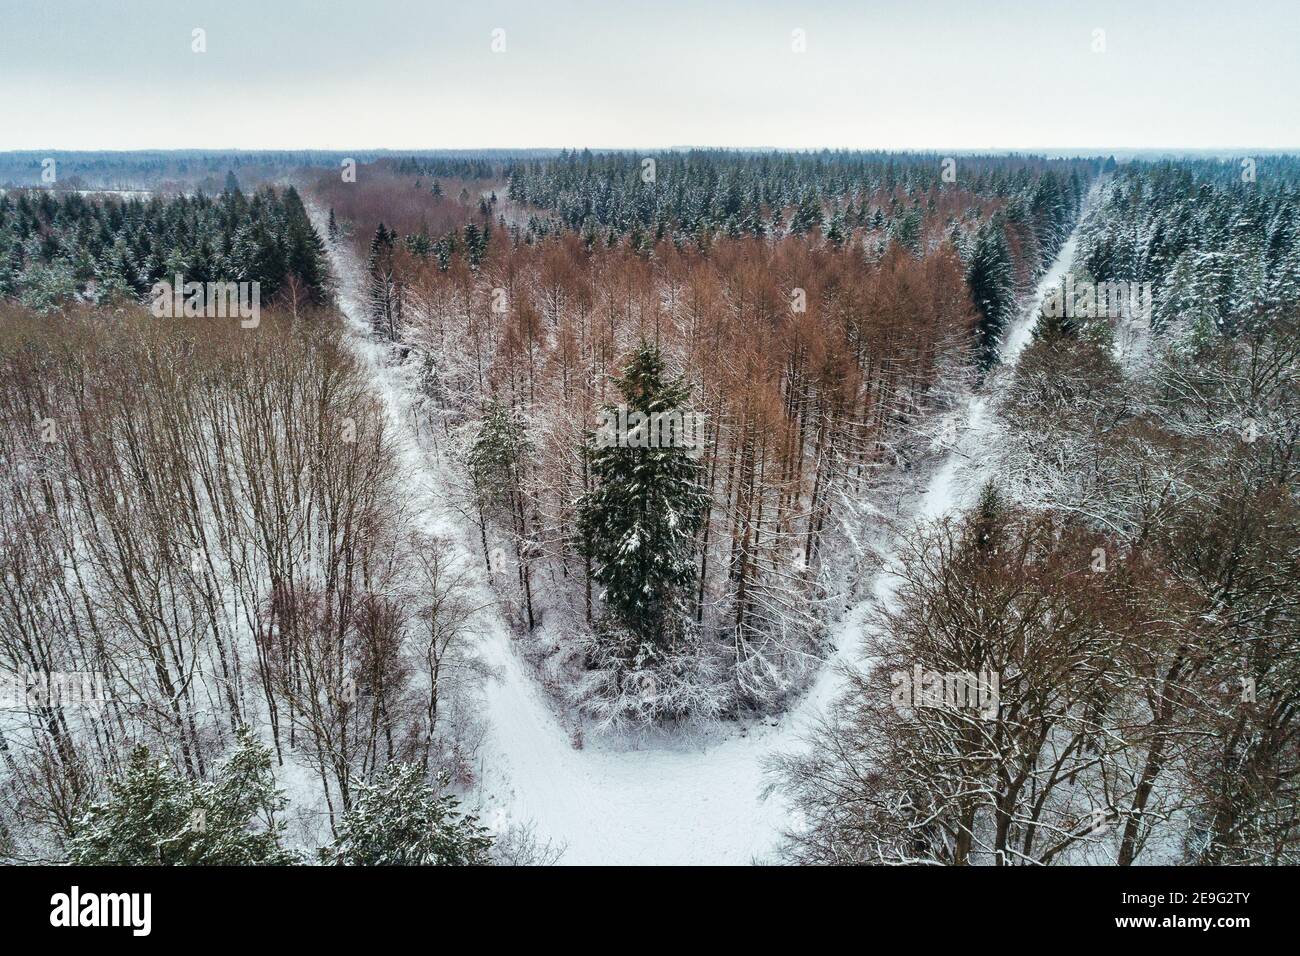 The forest lokally known as Hopelser Wald covered in snow Stock Photo